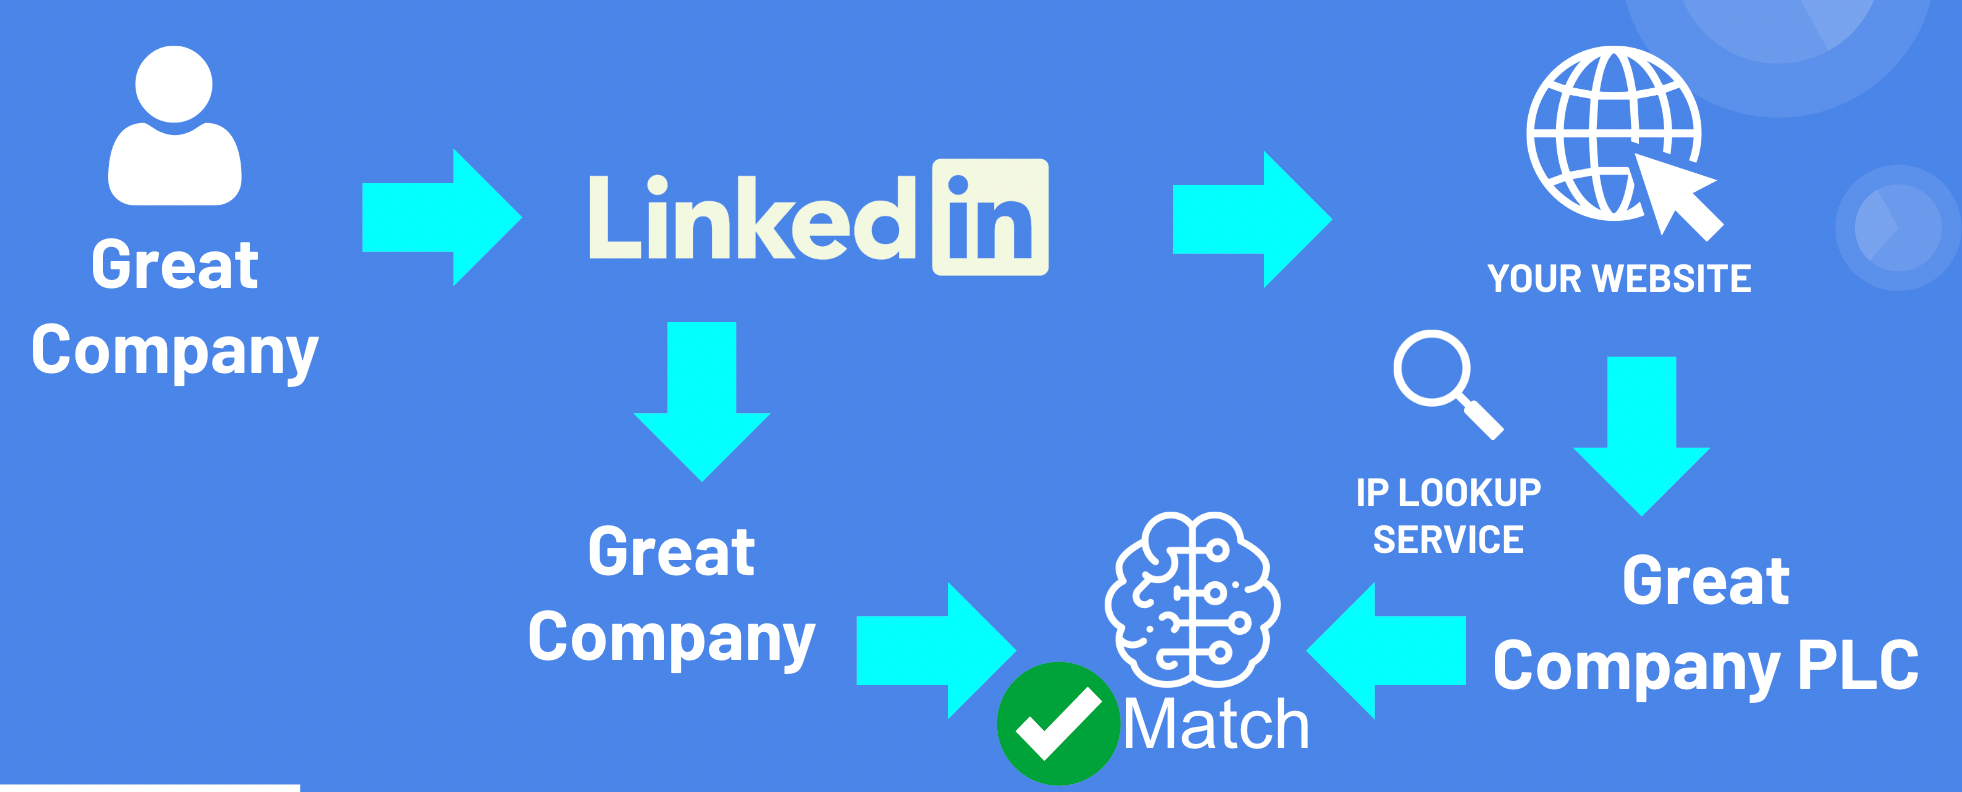 Diagram showing how to fuzzy match LinkedIn data to website visitors. 